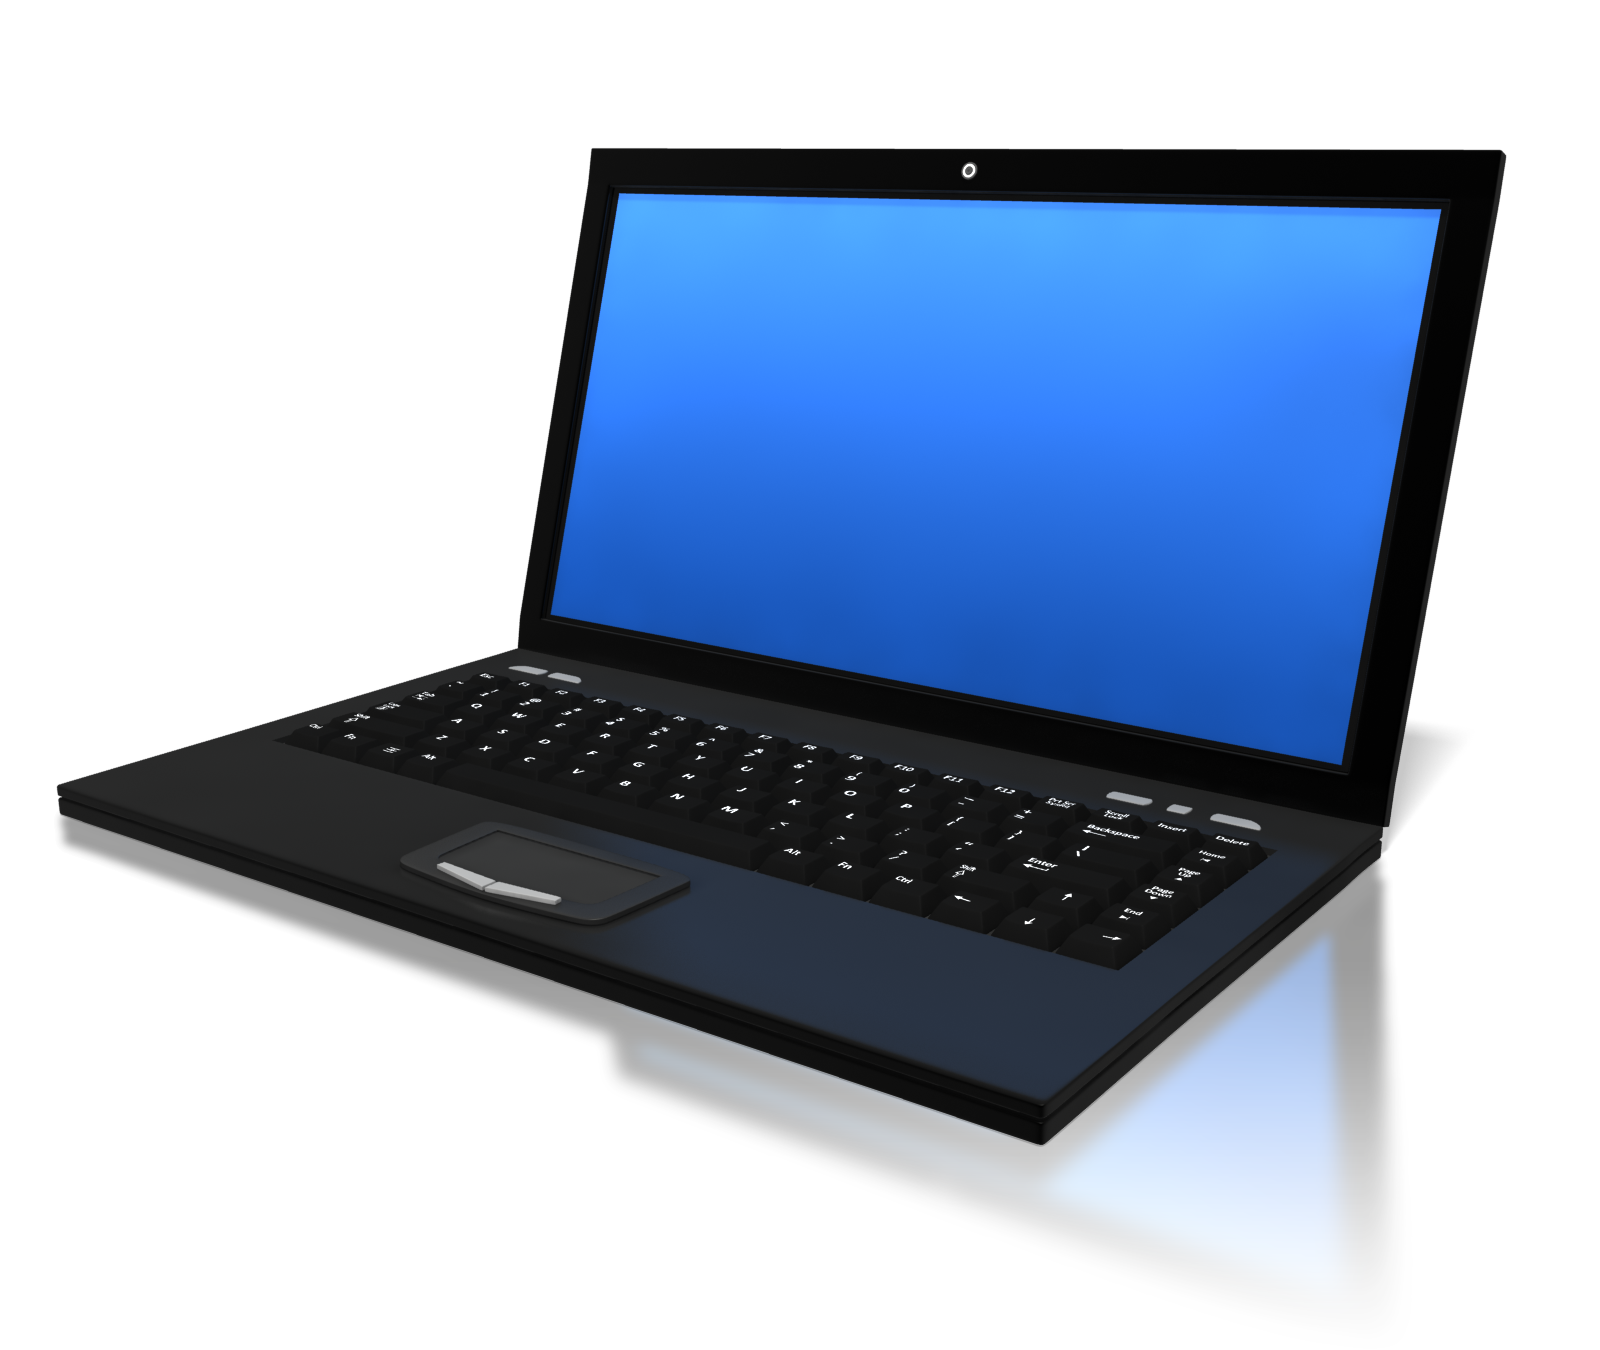 Our Laptop Support Specialists offer technical support to employees or customers for laptops. We install, troubleshoot and perform repairs on any laptops, regardless of brand, specs, OS.